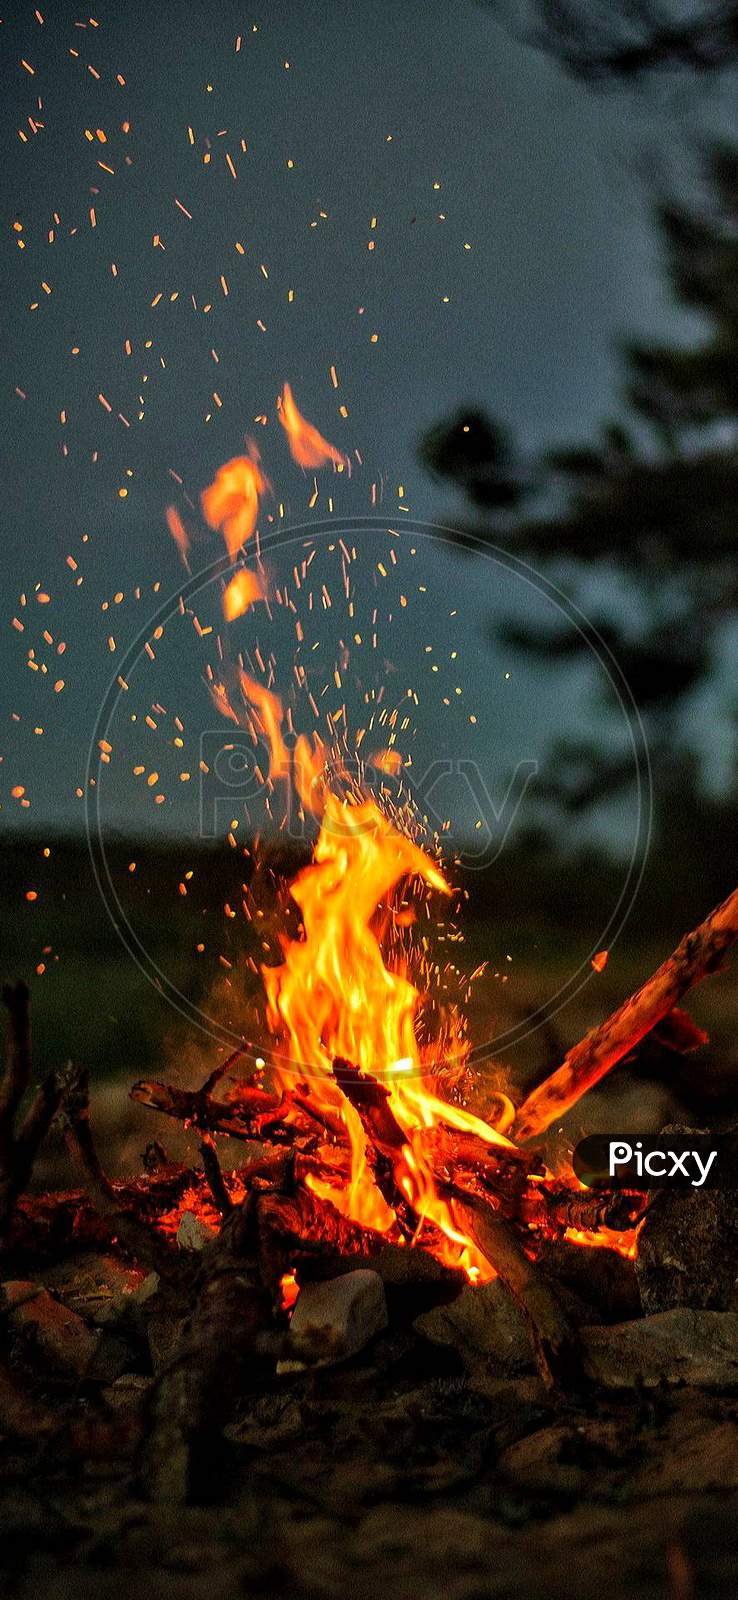 Burning firewood during night at an outdoor camp